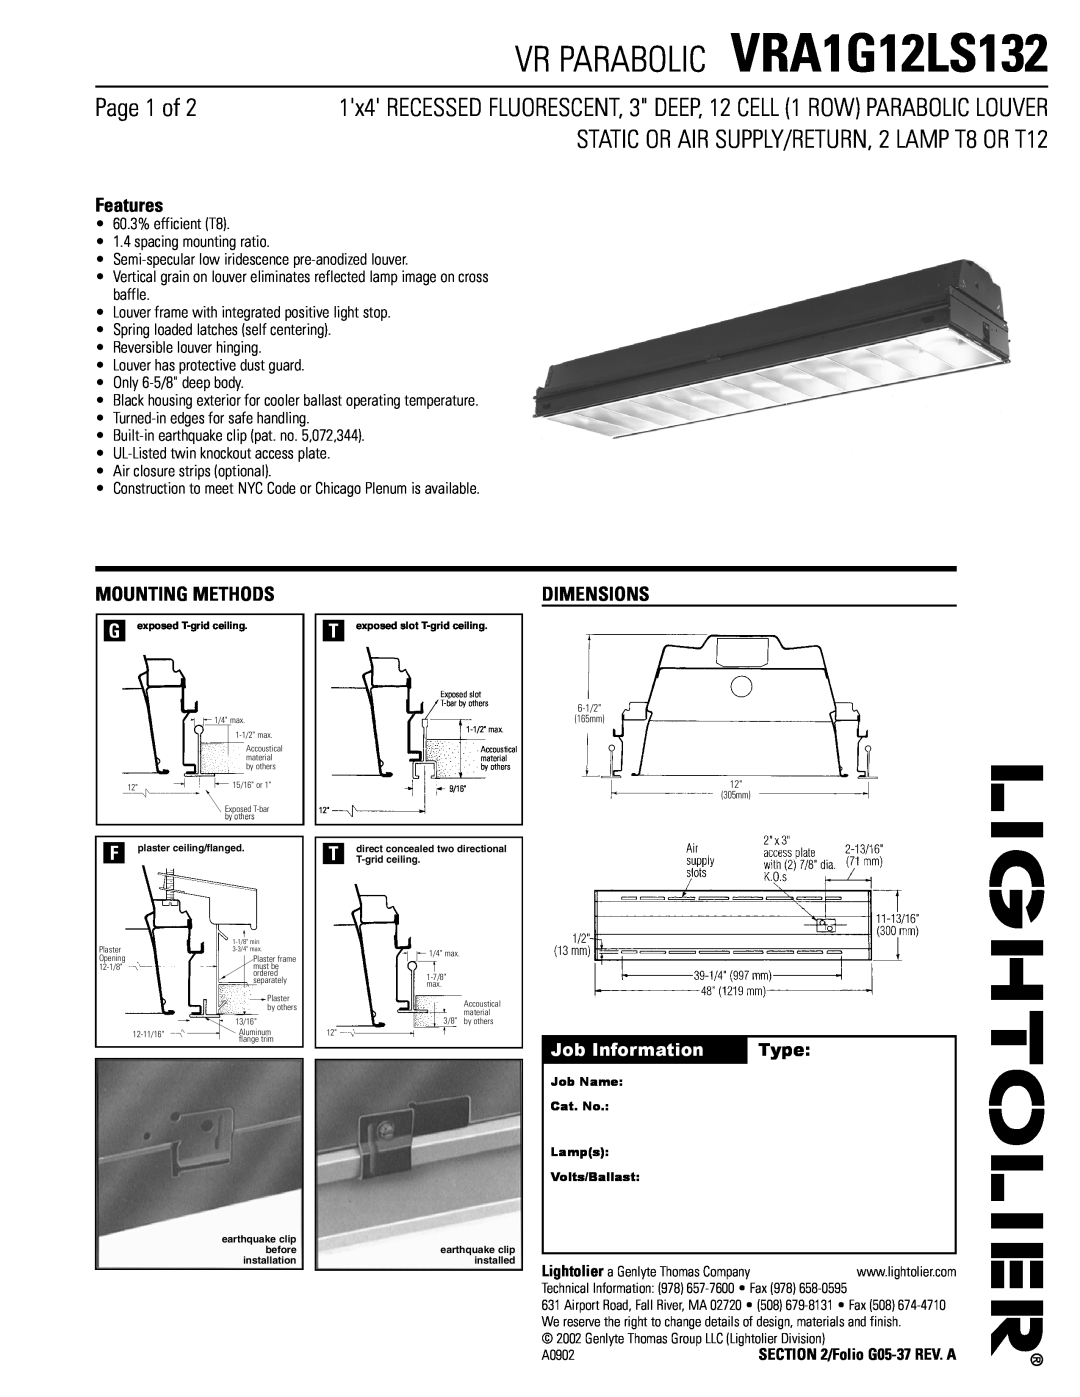 Lightolier dimensions VR PARABOLIC VRA1G12LS132, Page 1 of, STATIC OR AIR SUPPLY/RETURN, 2 LAMP T8 OR T12, Features 